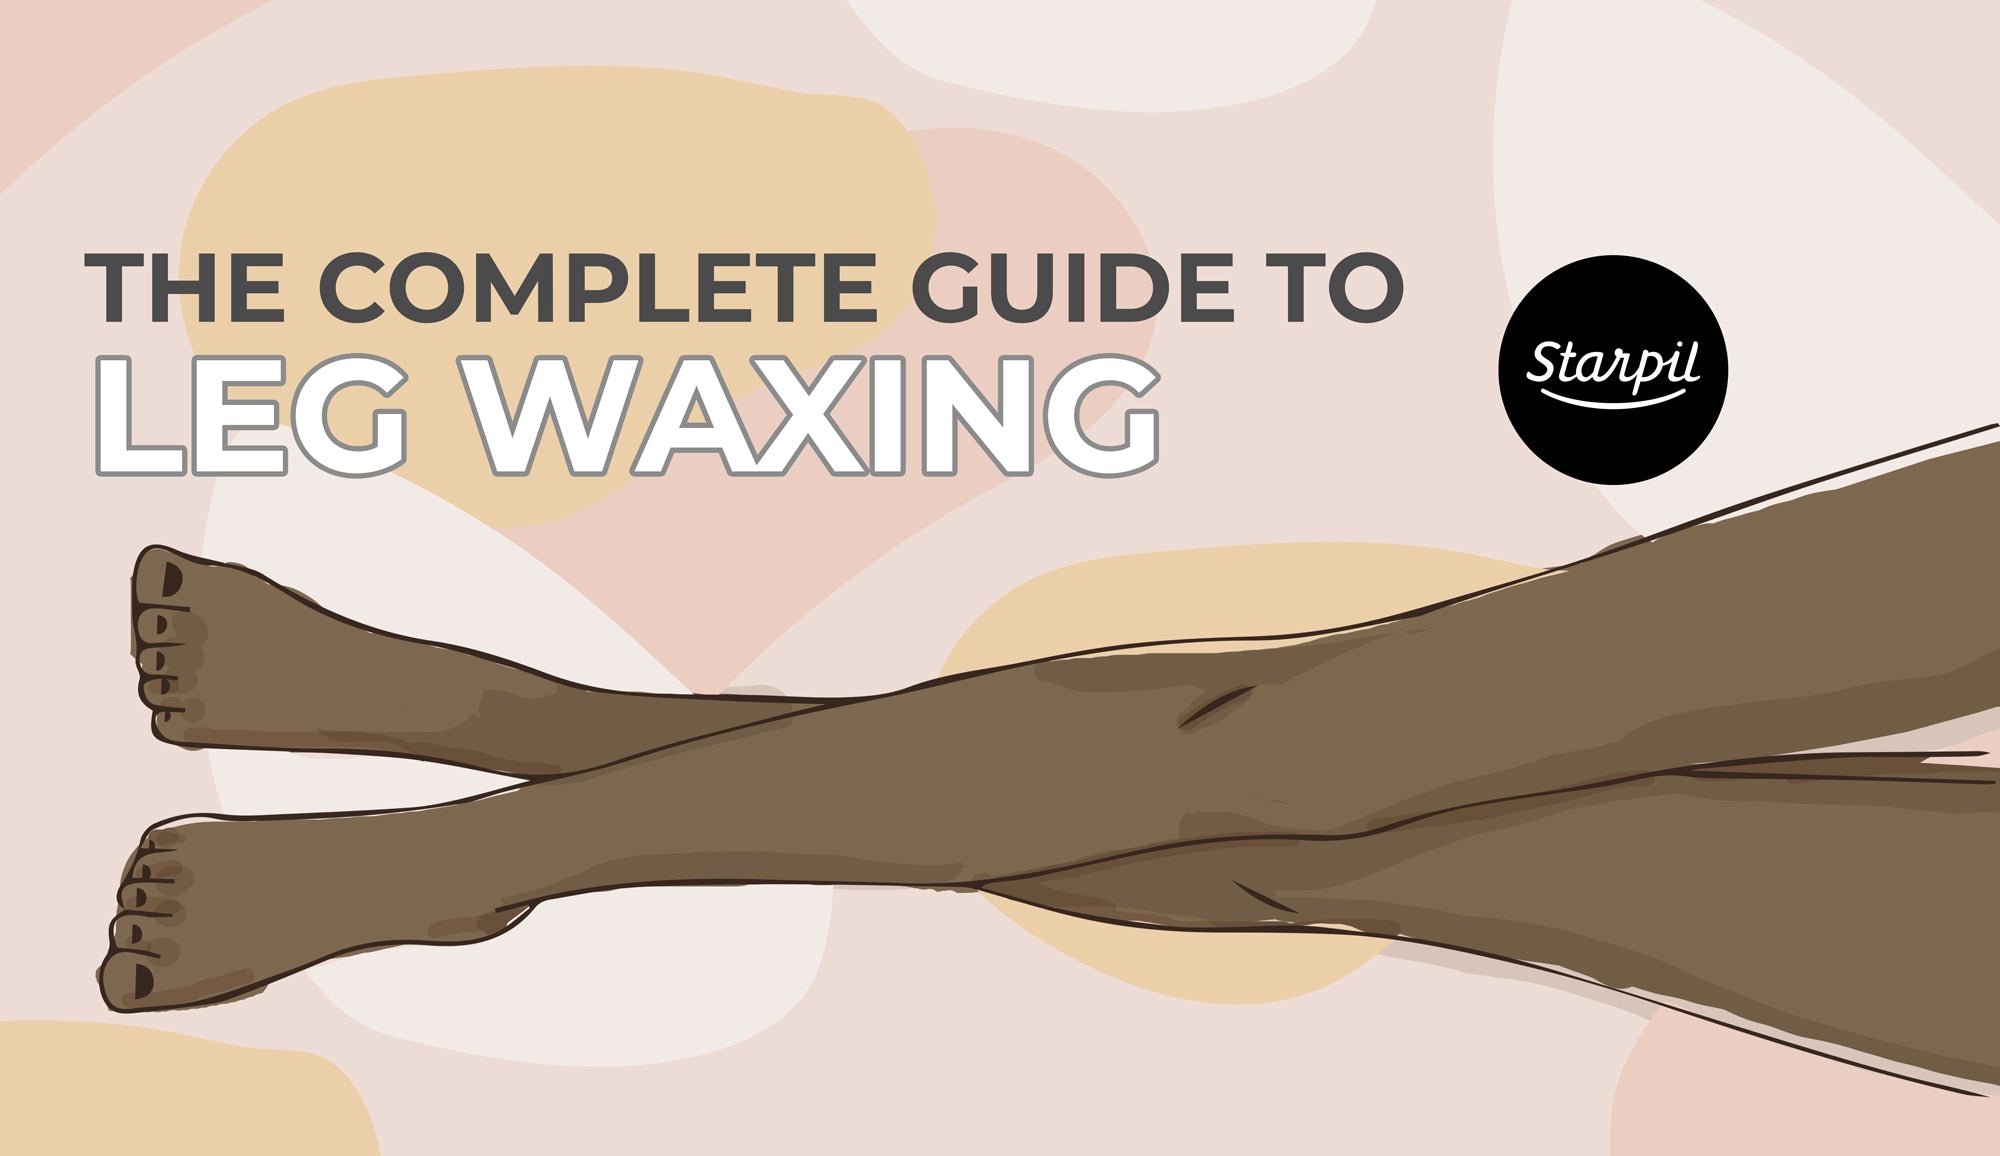 The Complete Guide to Leg Waxing